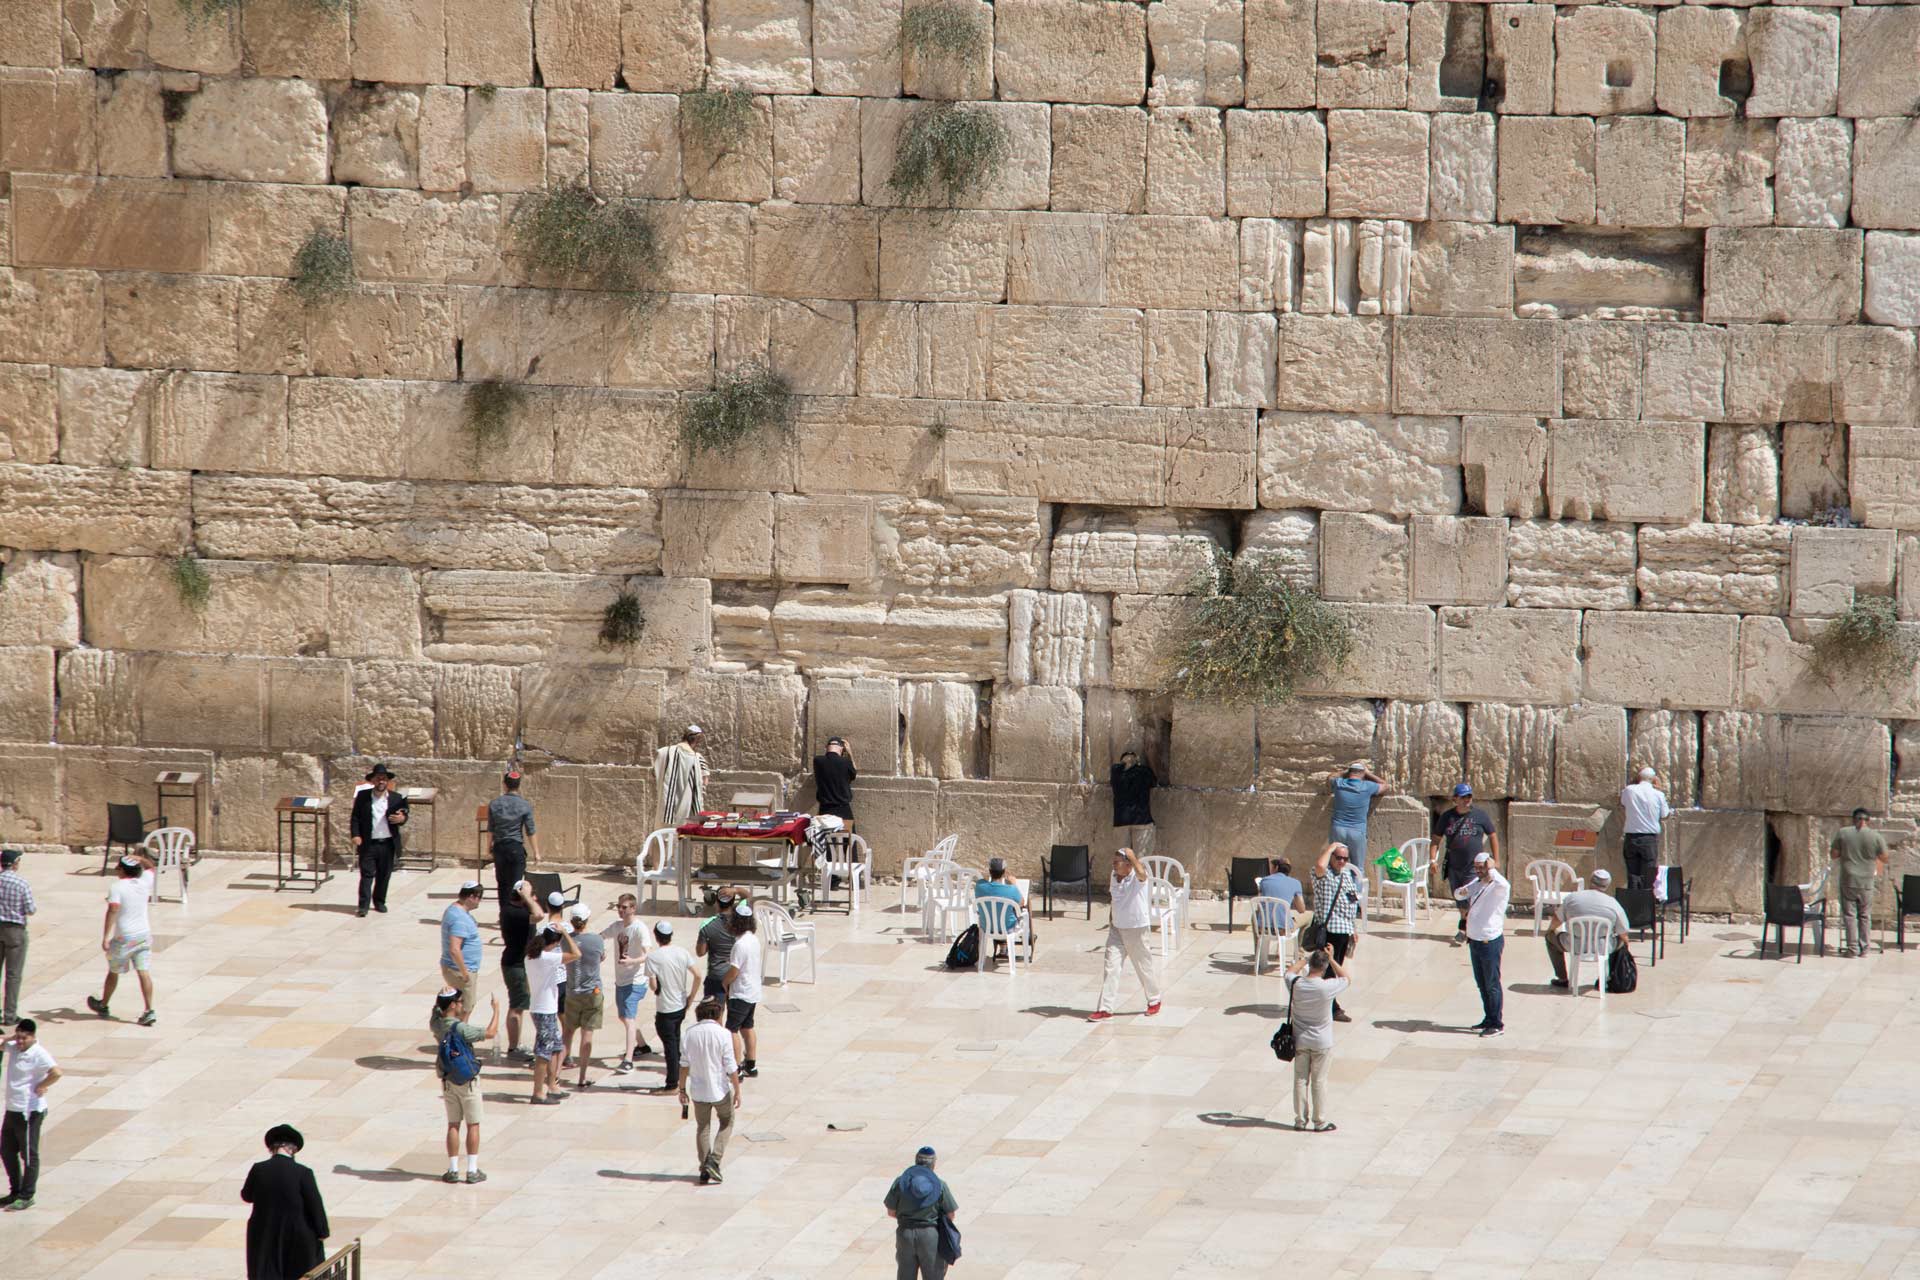 Men's section of the Western Wall (Wailing Wall), Jerusalem, Israel